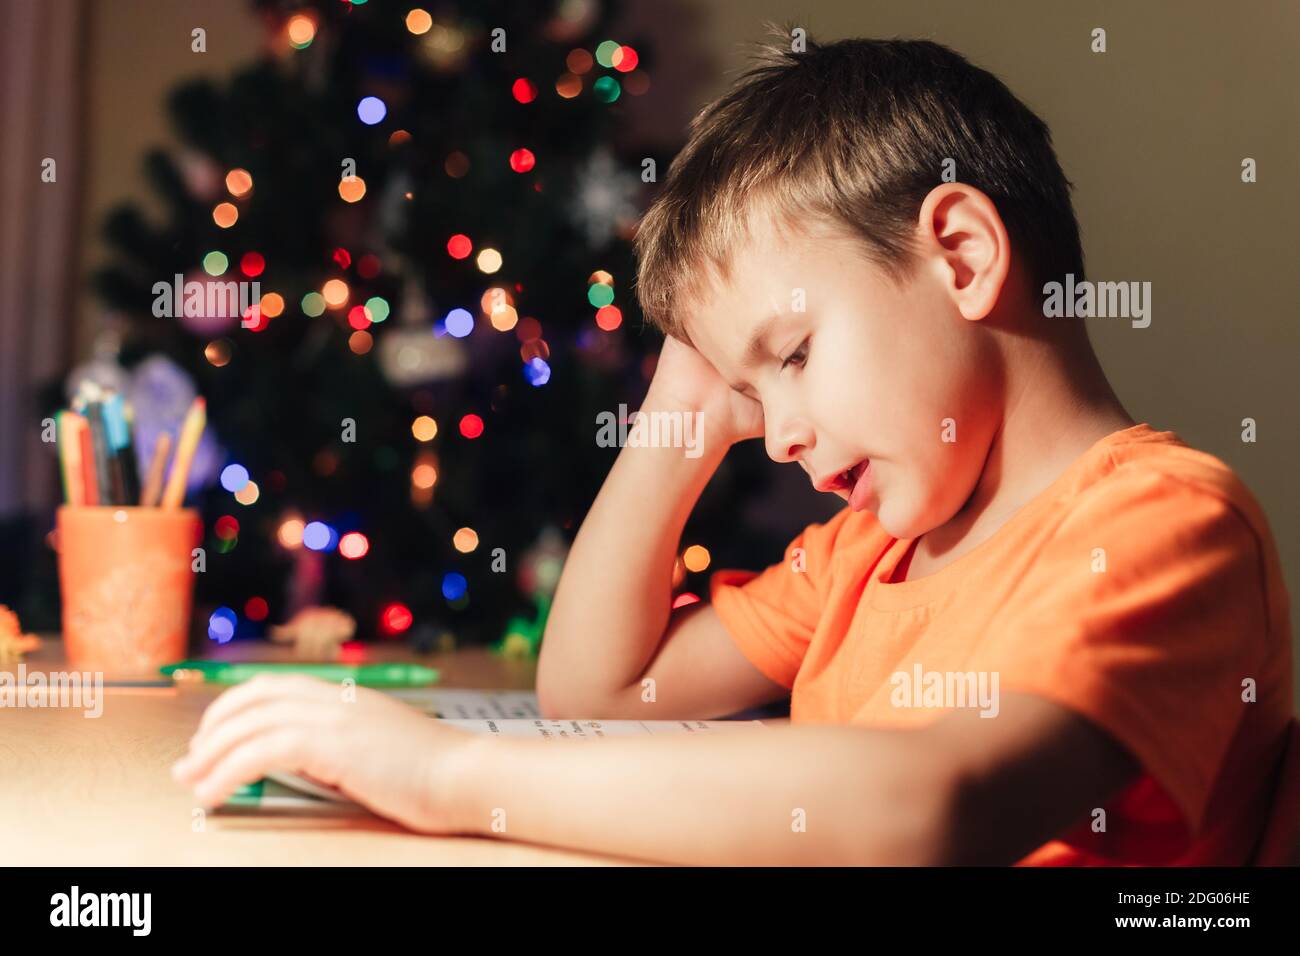 7 yeas old boy sitting at desk and reading book. Decorated Christmas tree on background Stock Photo